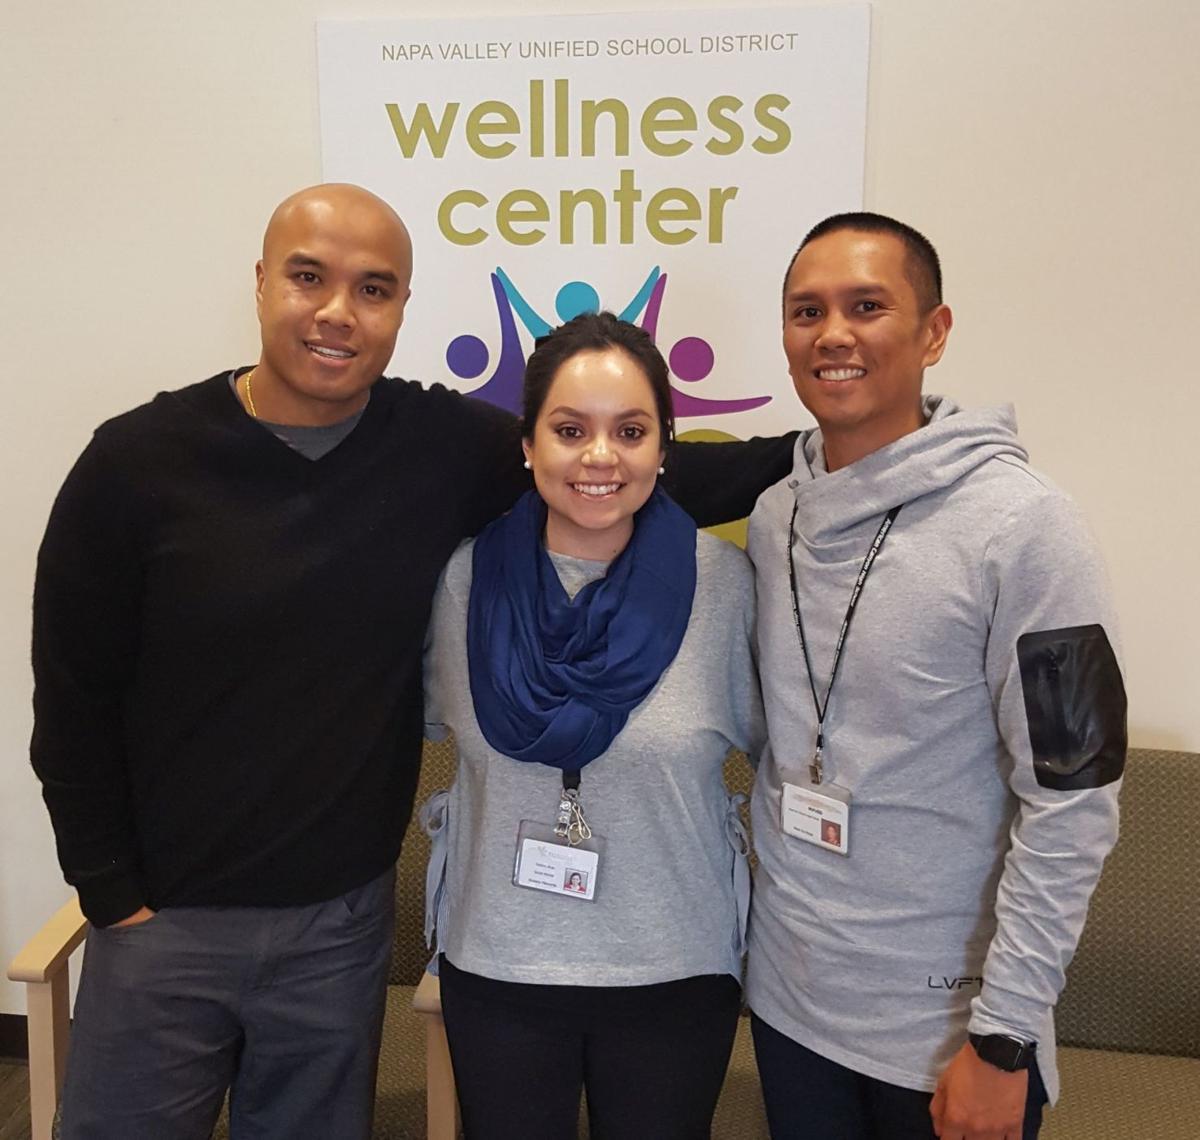 ACHS opens limited Wellness Center, seeks funding for expansion